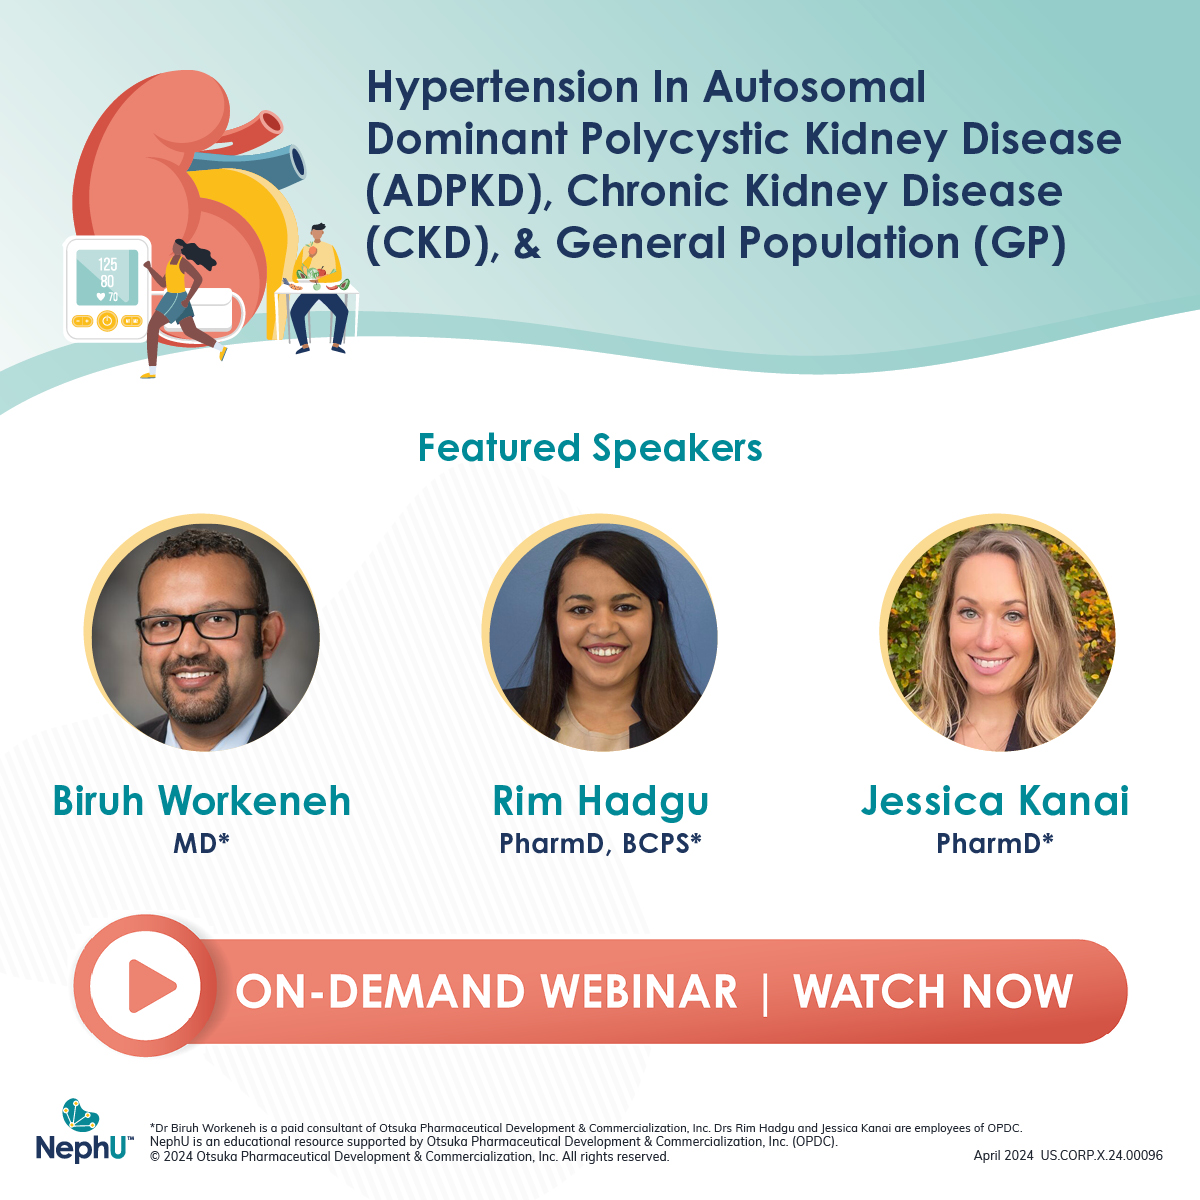 Don’t miss our on-demand webinar with Dr Workeneh as he unravels the pathophysiology and management of HTN in the general population (GP) versus patients with ADPKD and Chronic Kidney Disease (CKD). Watch now! go.nephu.org/MCgE #CKD #ADPKD #hypertension #Nephrology #NephU